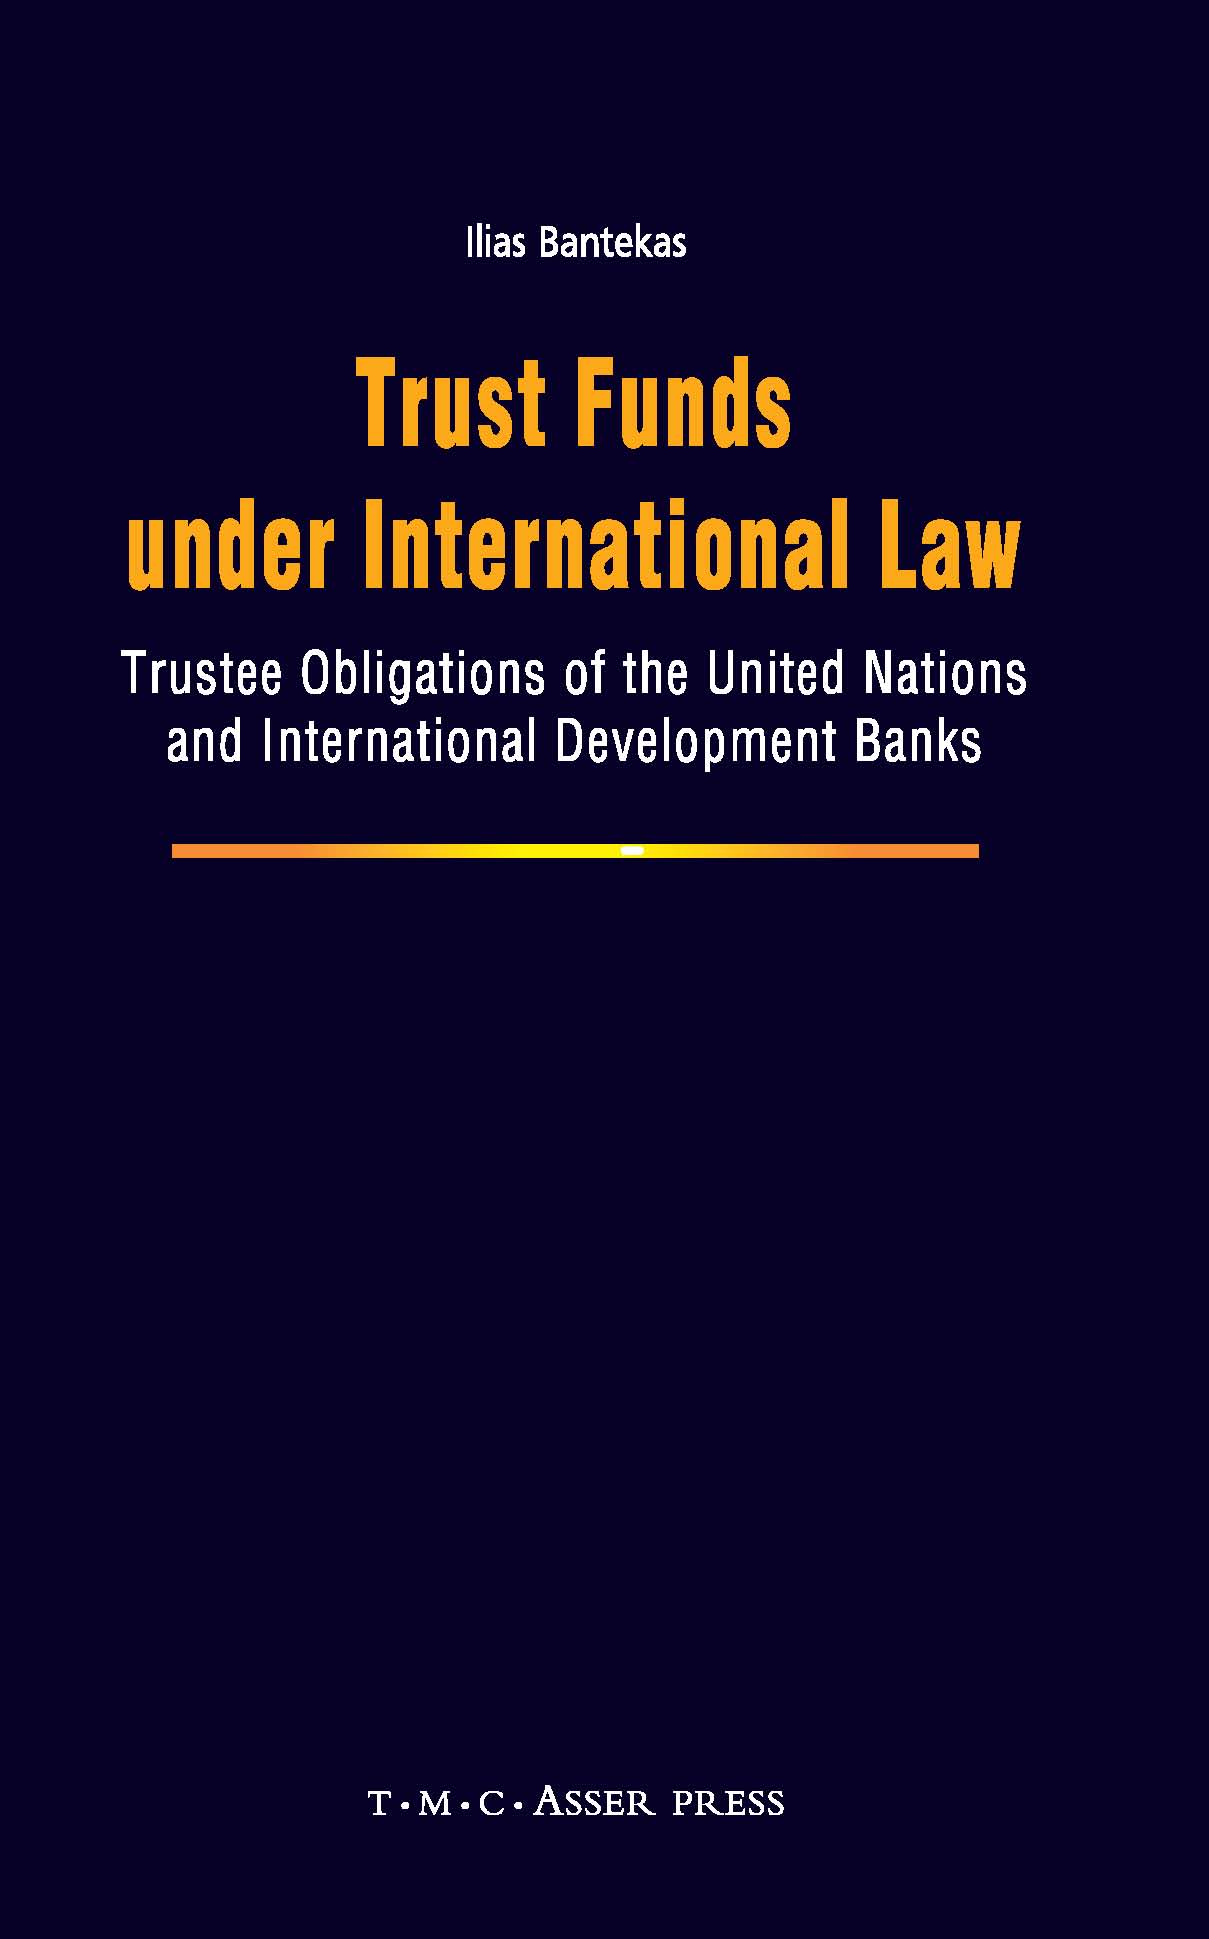 Trust Funds under International Law - Trustee obligations of the United Nations and International Development Banks